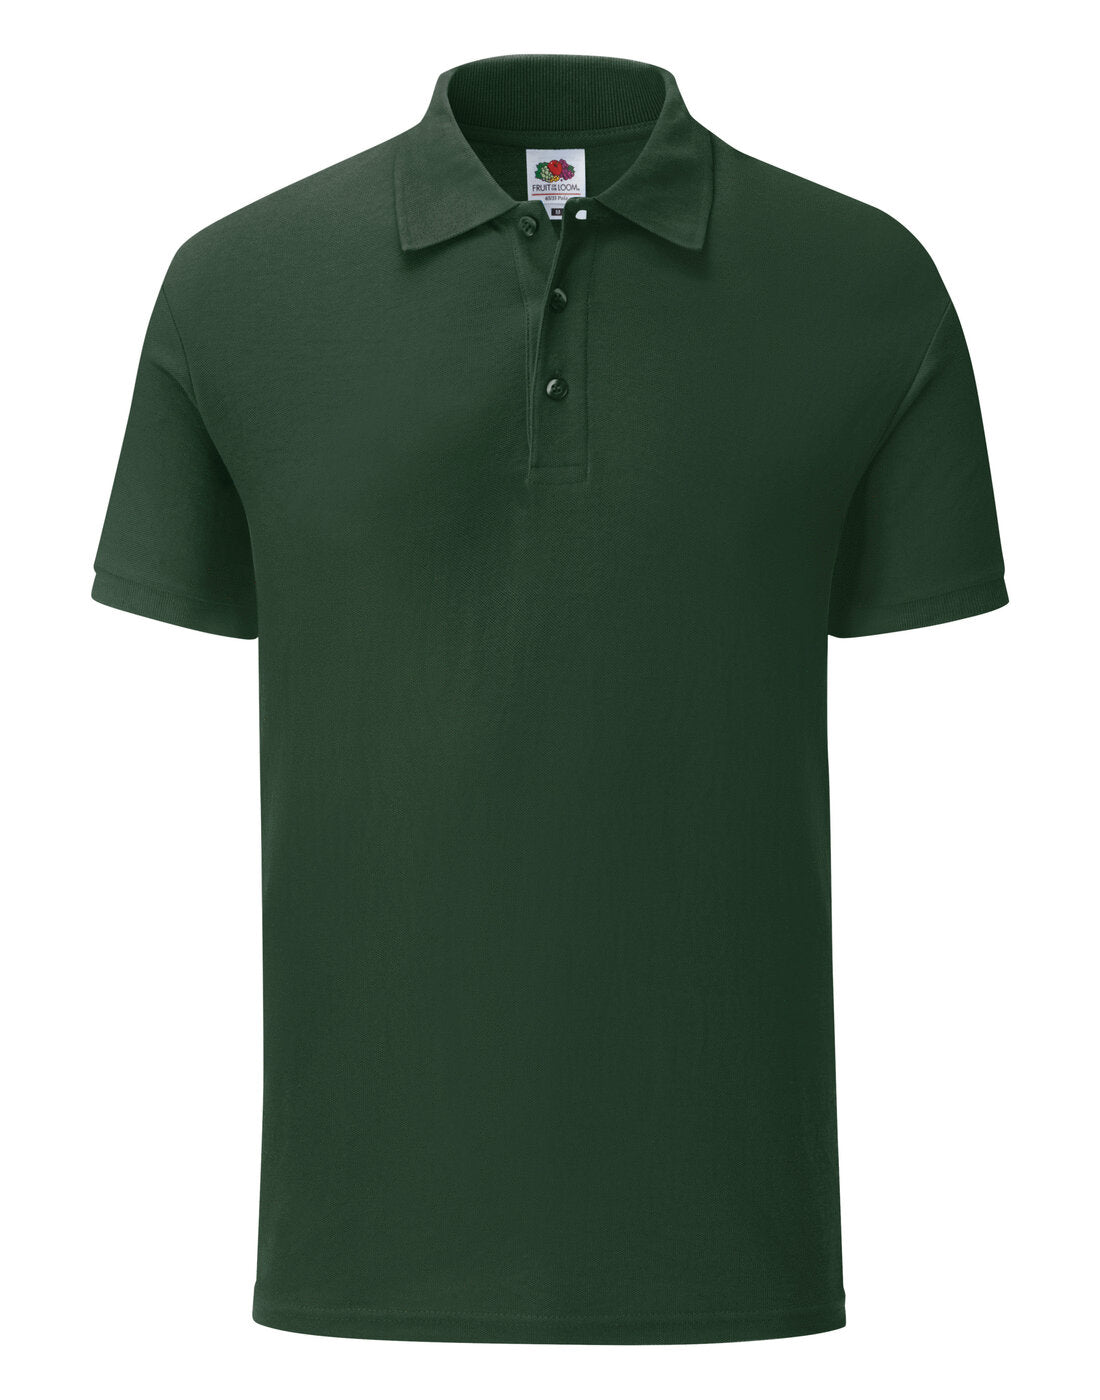 Fruit of the Loom 65/35 Tailored Fit Polo - Bottle Green